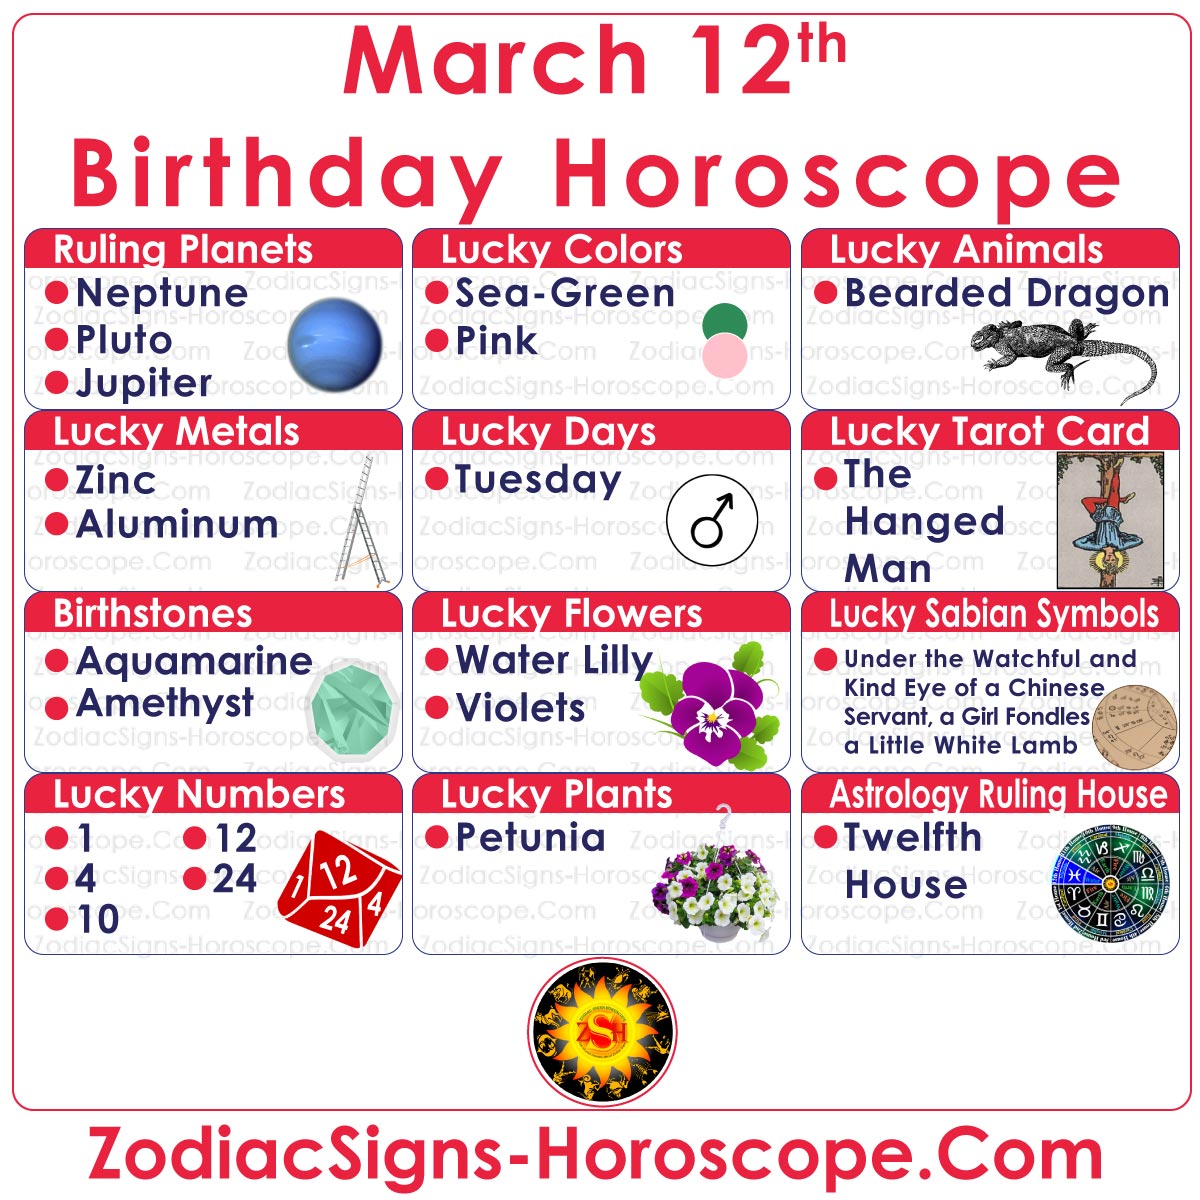 What is the zodiac sign of March 12?